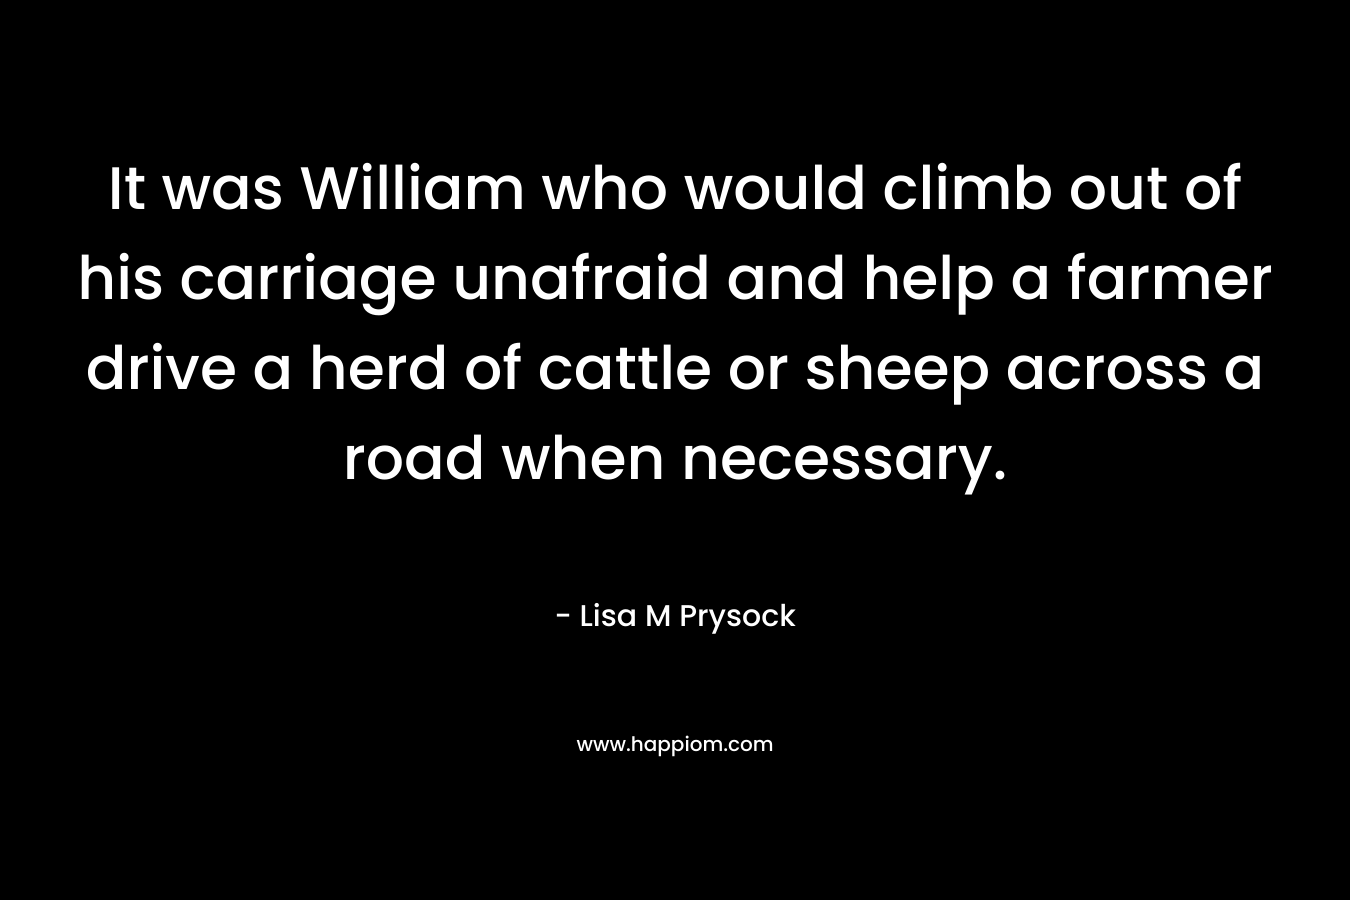 It was William who would climb out of his carriage unafraid and help a farmer drive a herd of cattle or sheep across a road when necessary. – Lisa M Prysock